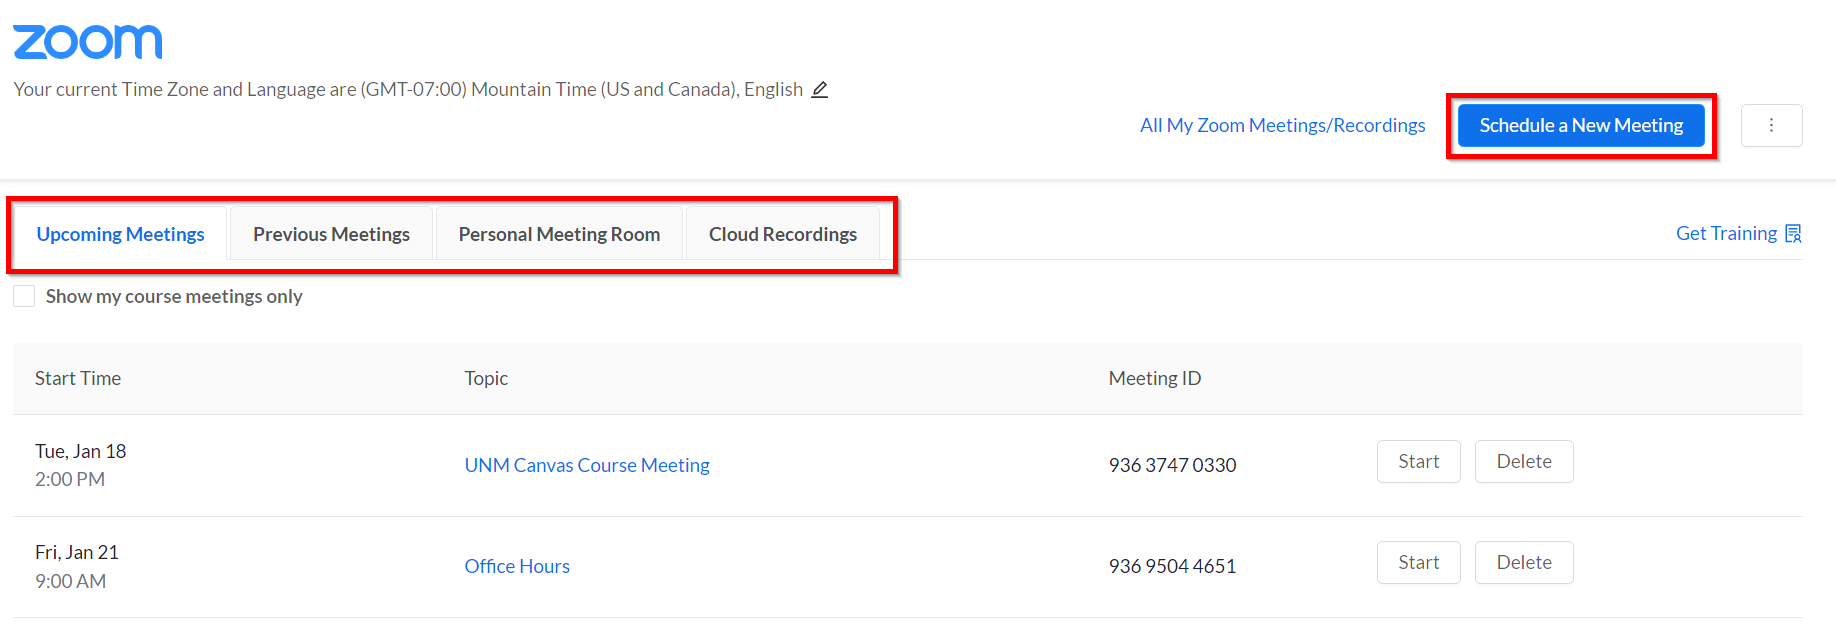 zoom-meetings-overview_marked.png